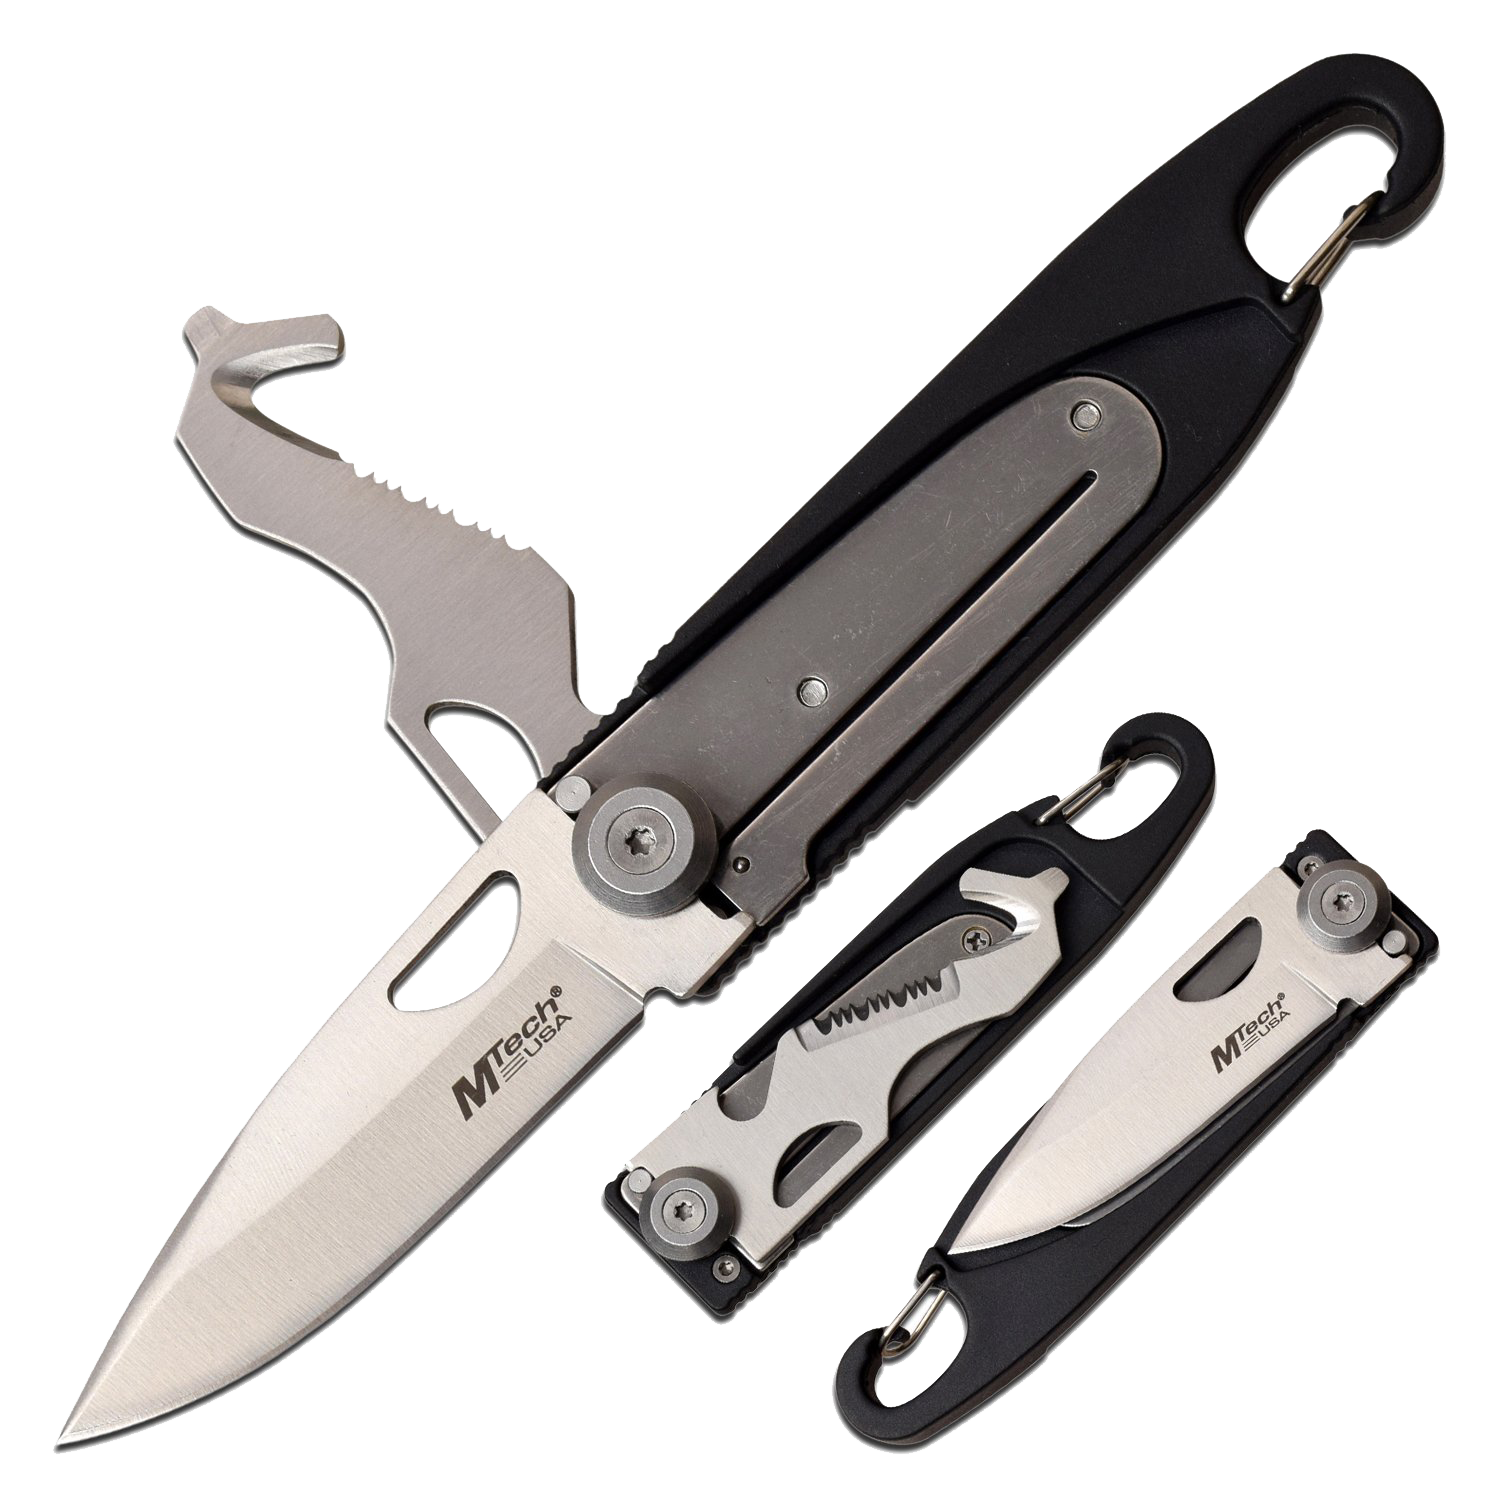 Mtech Mtech Drop Point Multi-Tools Folding Knife - 6.5 Inches Overall #mt-1102Bk Dim Gray